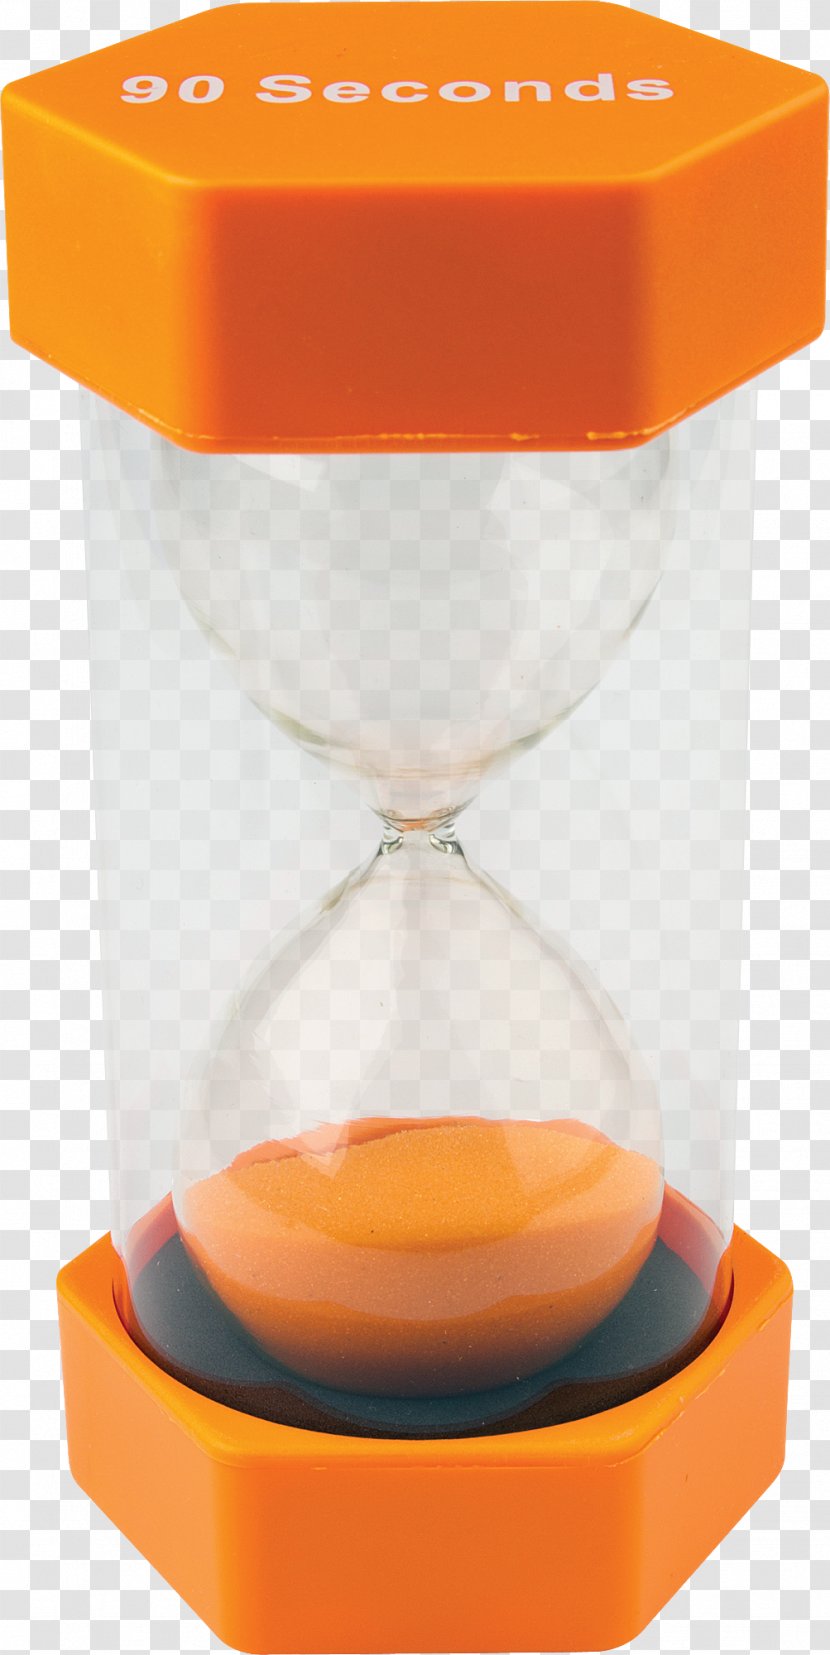 Hourglass Timer Chronometer Watch Second Transparent PNG